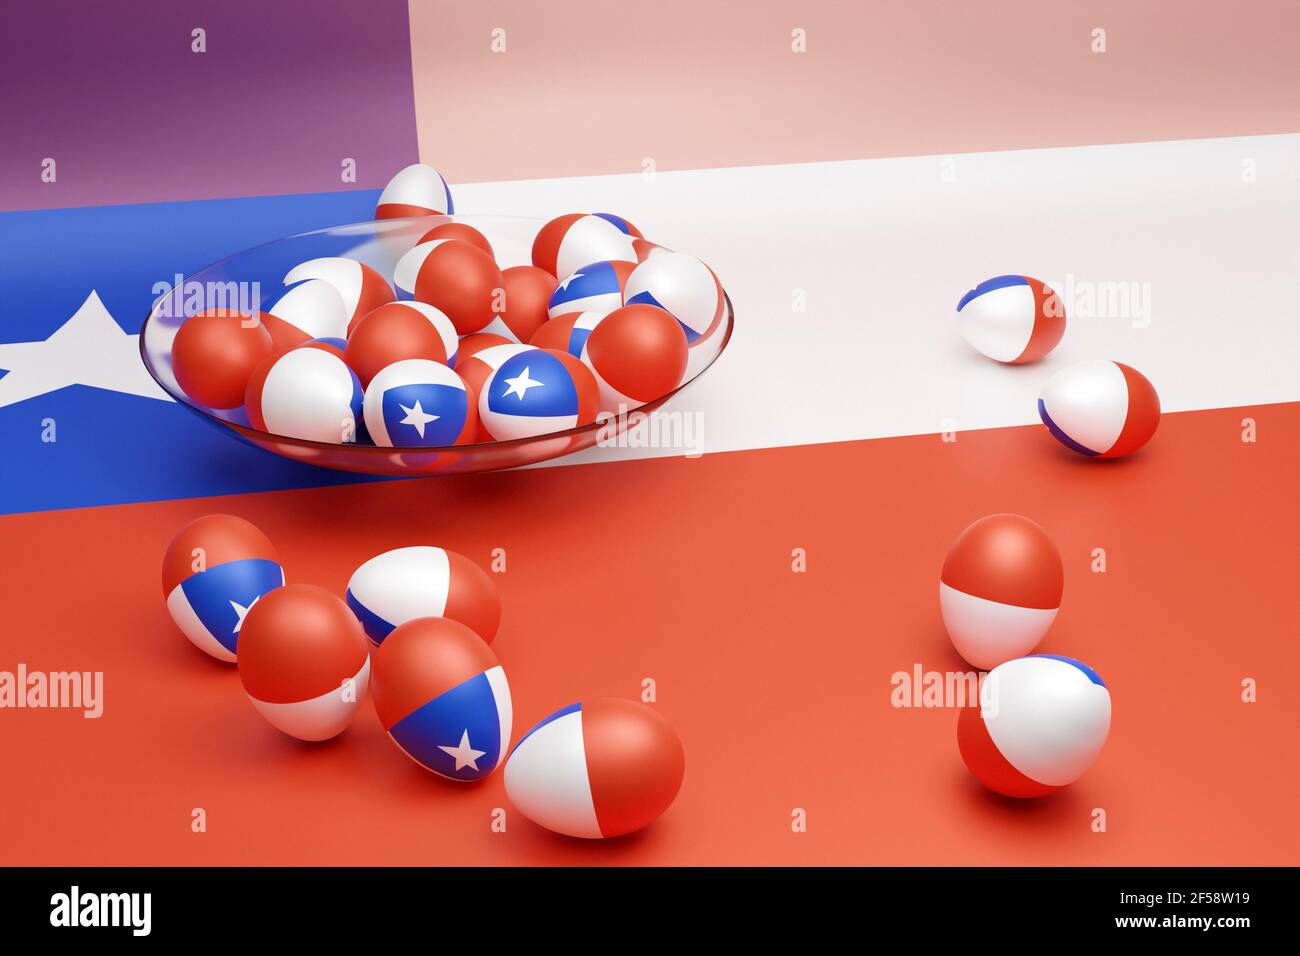 3d illustration of balls with the image of the national flag of the Chile  on an isolated background. State symbol and patriotic Stock Photo